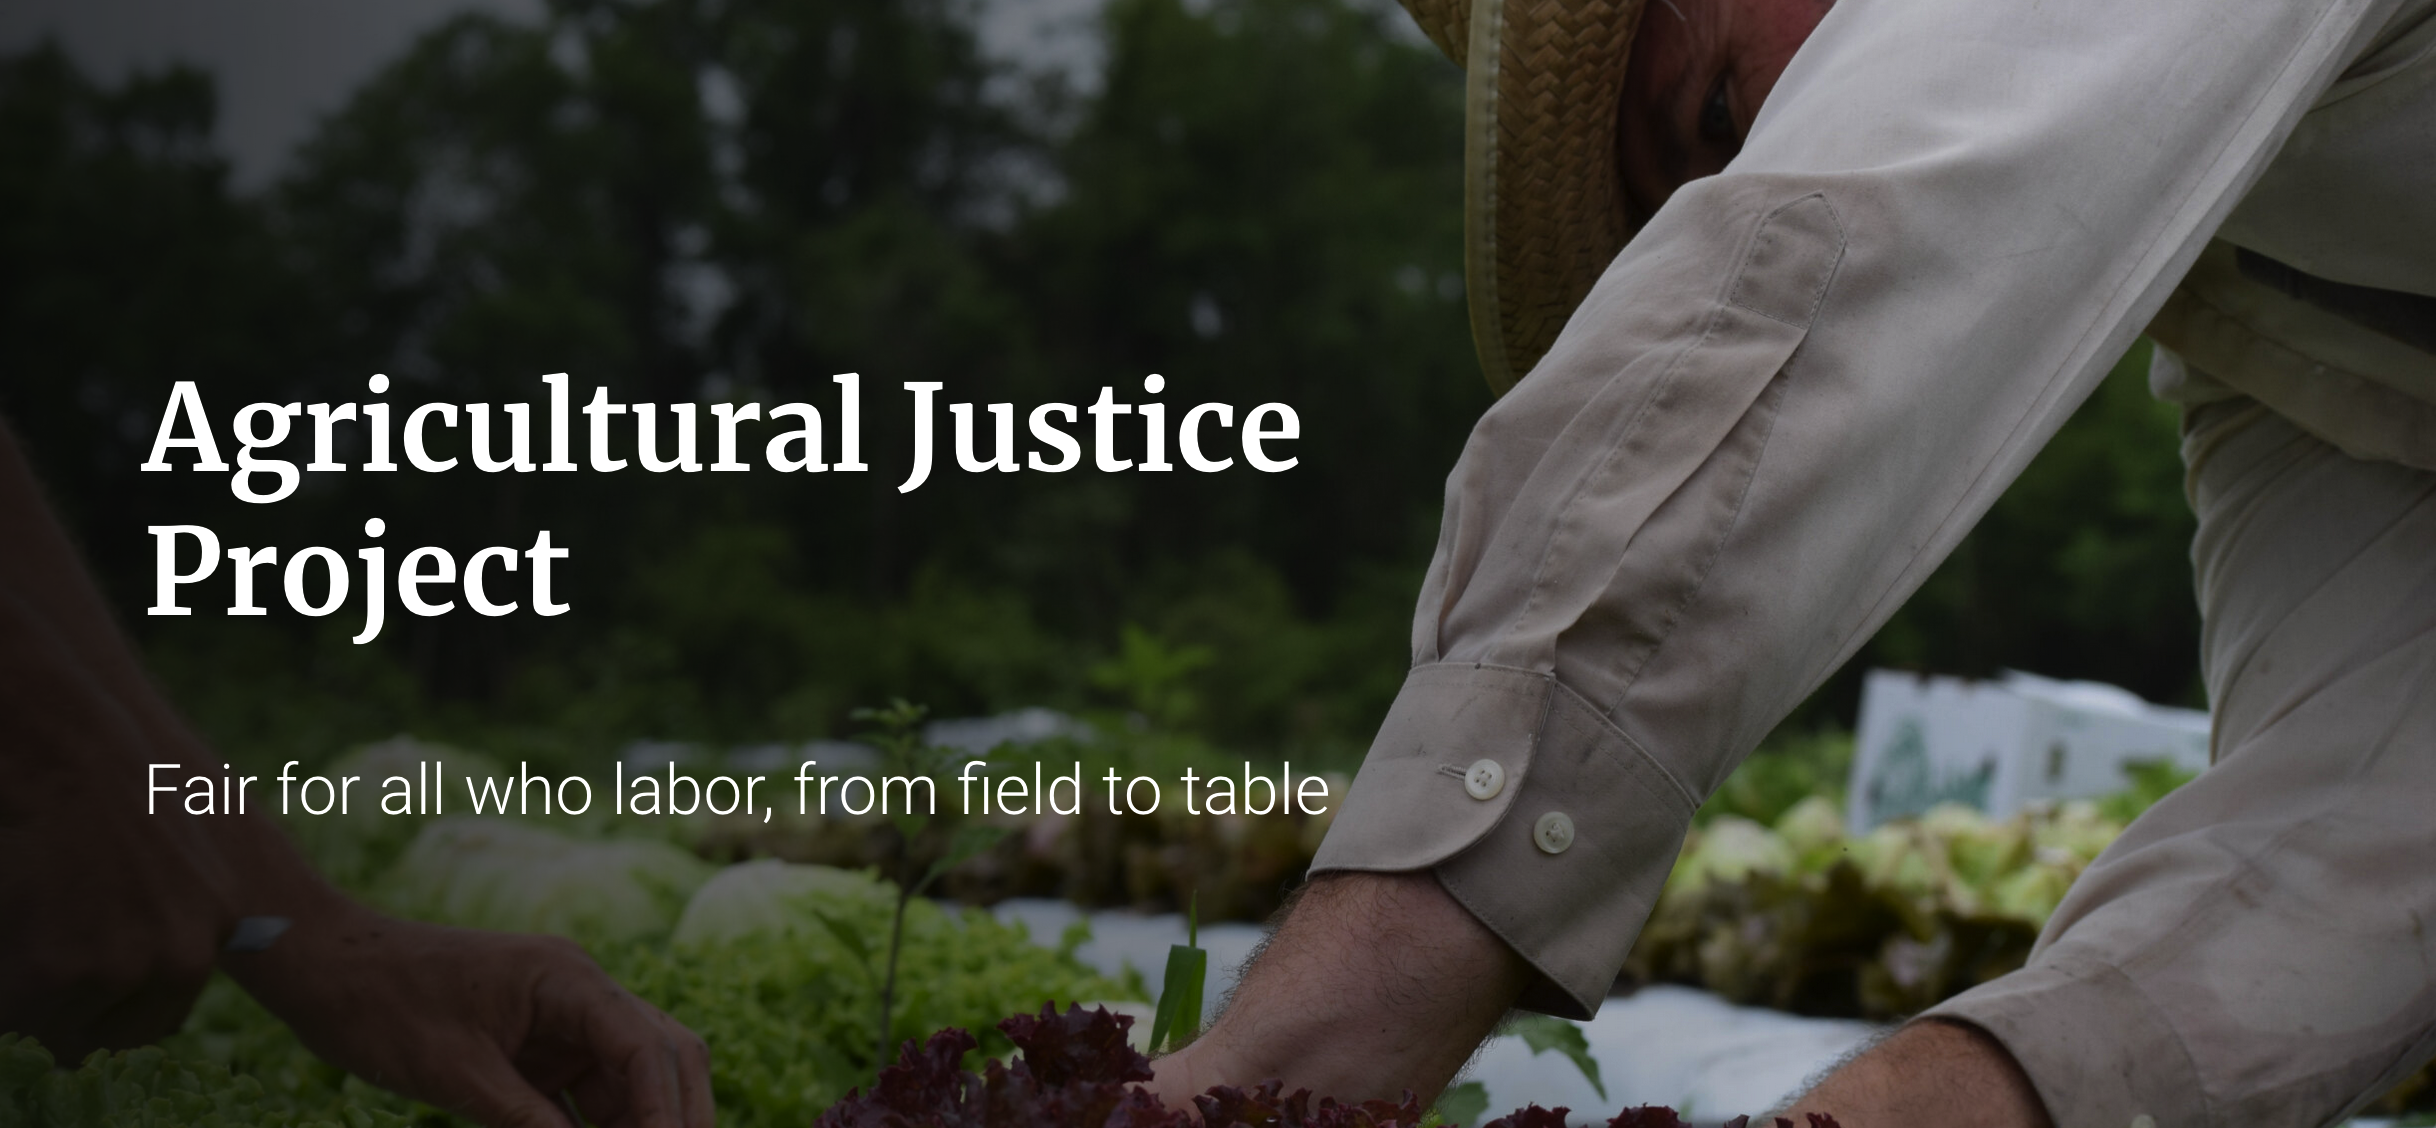 Farmworker's arm and heading, "Agricultural Justice Project"